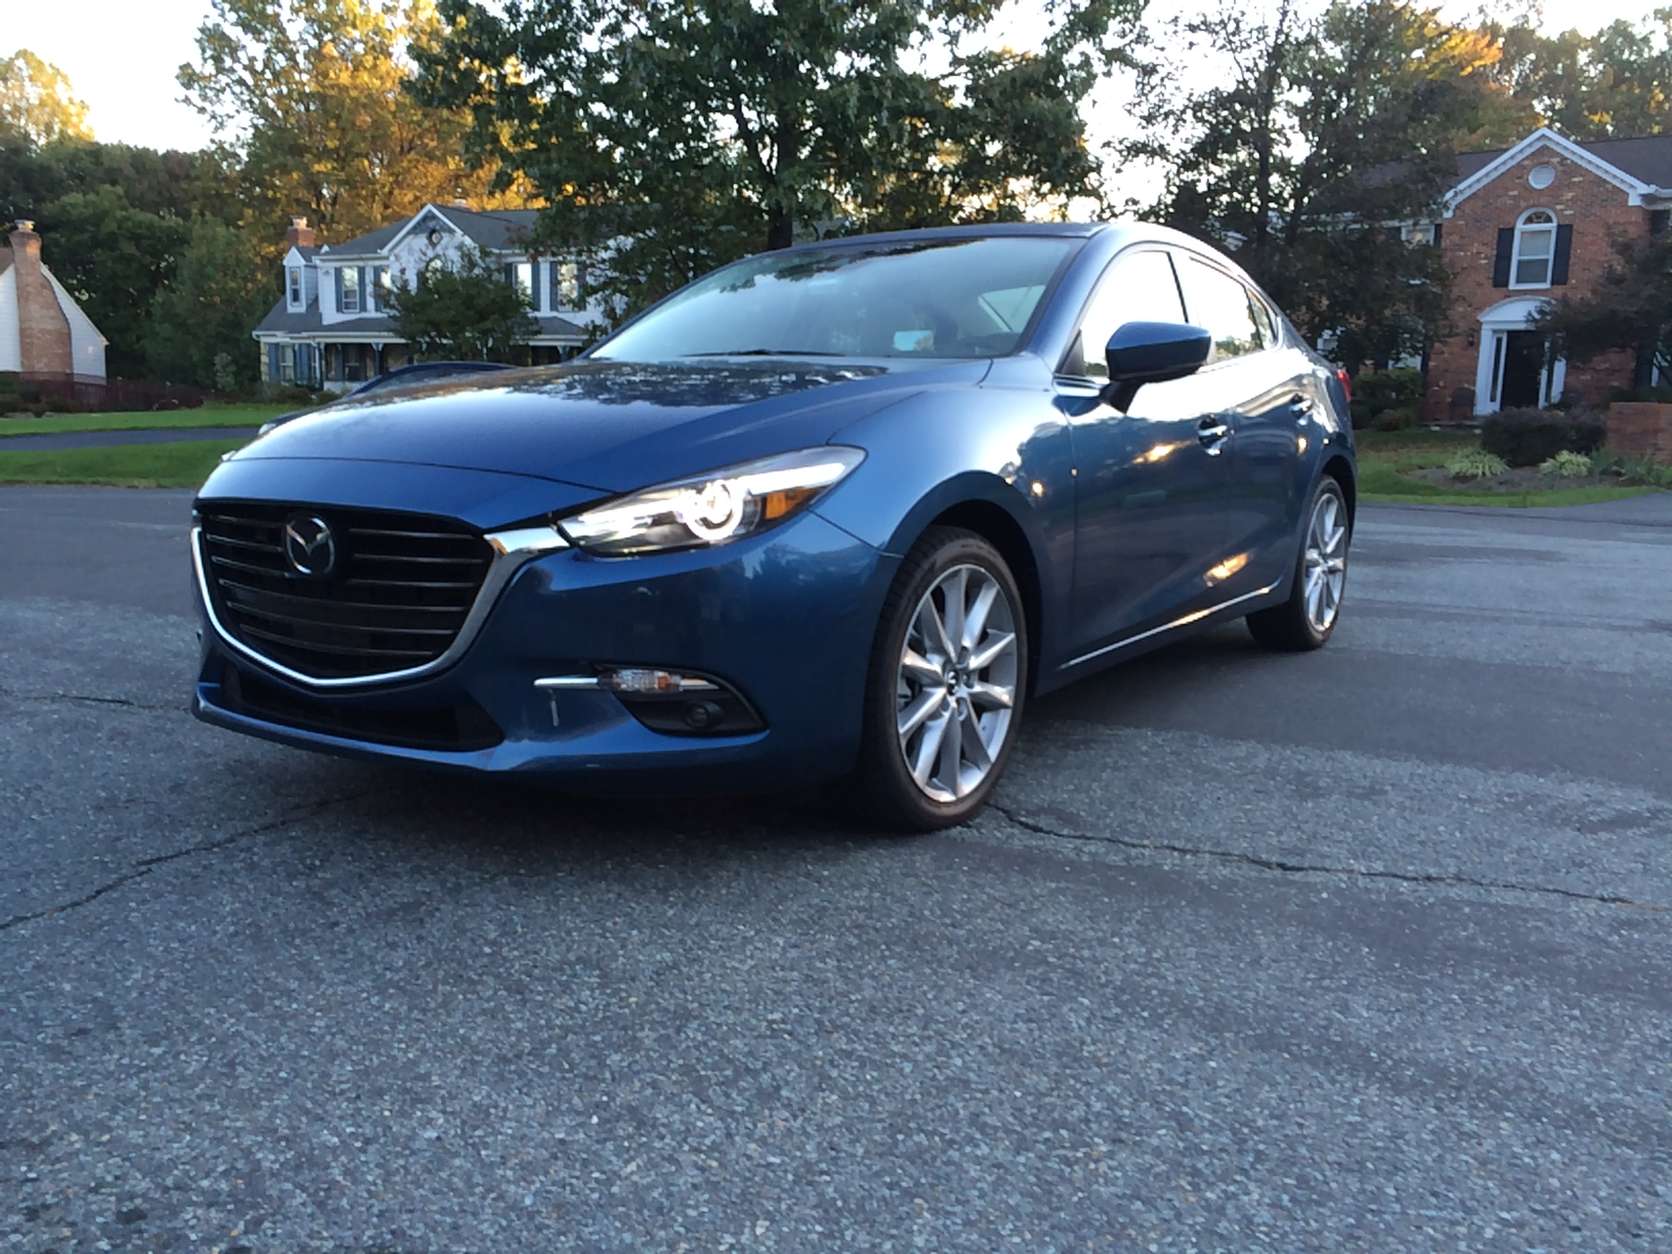 It’s a tough choice on whether to choose a Mazda3 hatch or sedan. (WTOP/Mike Parris)